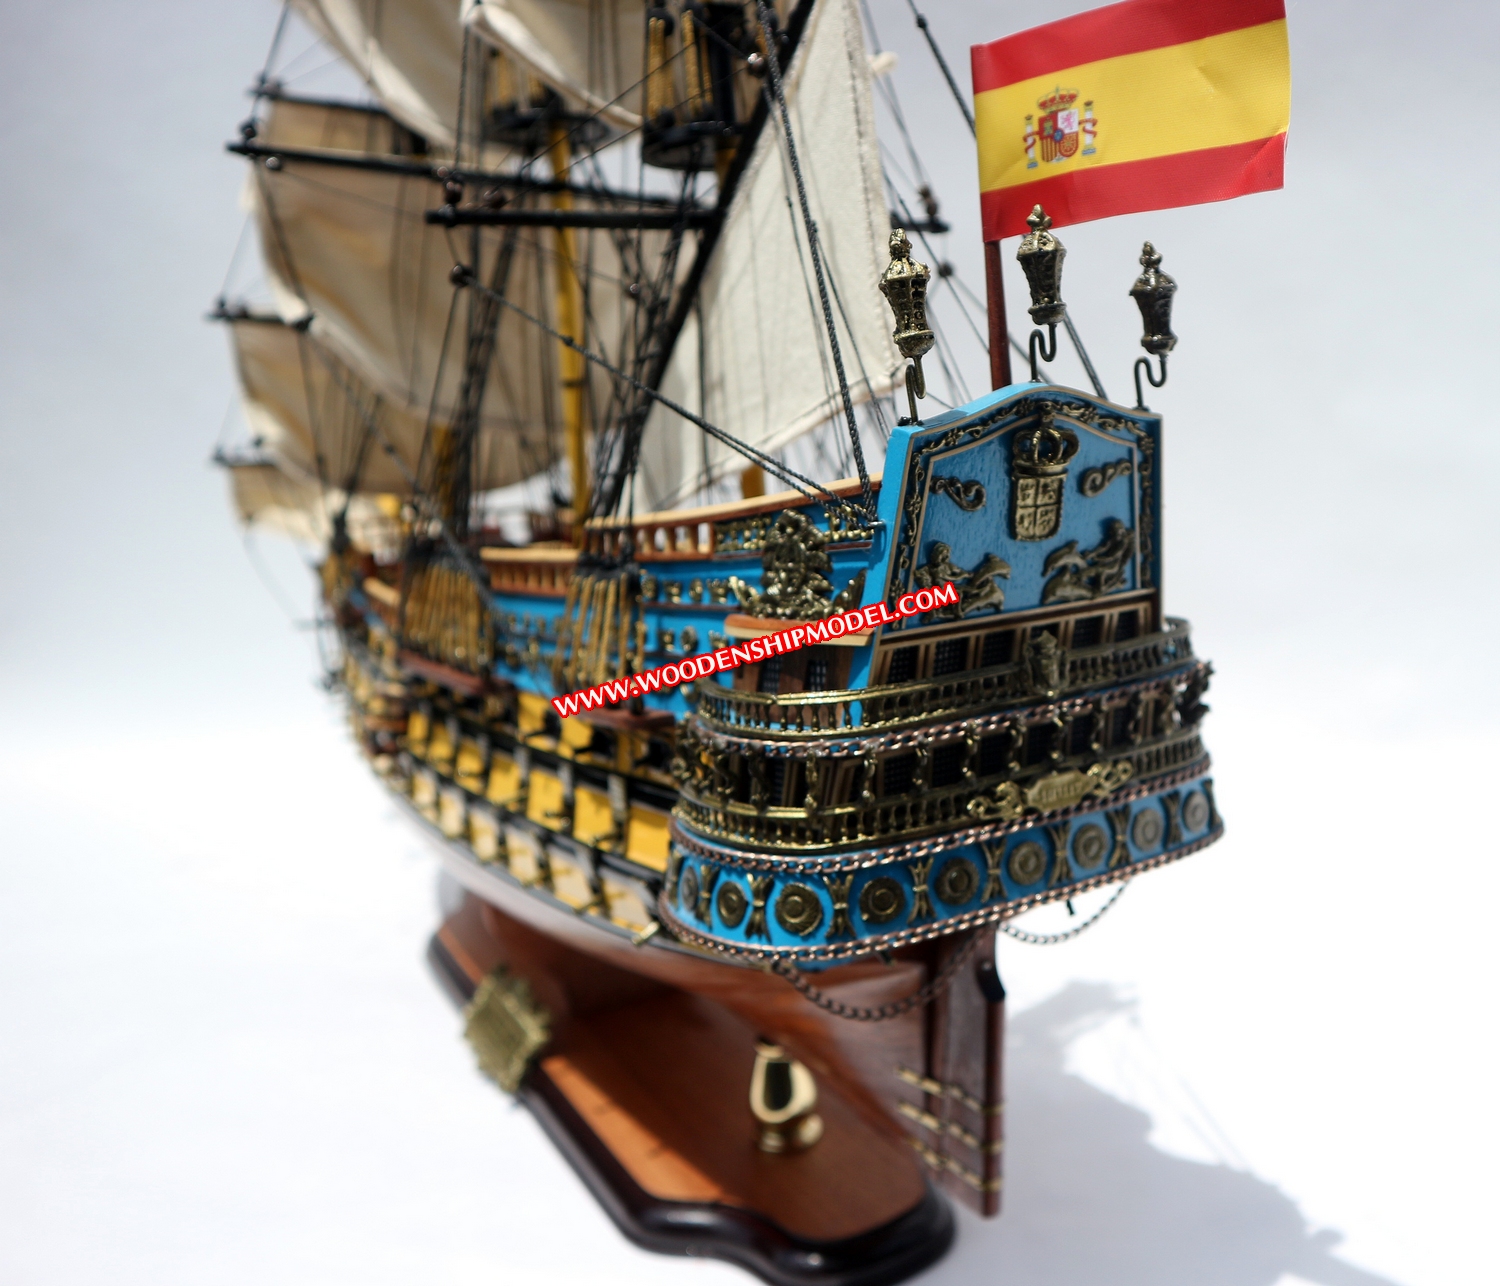 The San Felipe Launched in 1690, was one of the most beautiful Spanish ships of its era. She was led the Spanish Armada. San Felipe's role in the war against the British and French was to help protect Spanish settlements and harbours but also to transport gold from the new world. The San Felipe was armed with 96 cannons enough firepowew to match the best ships the French and British navies had to offer. In 1705, the SanFelipe fought a heroic battle against 35 British ships but was captured by an English ship and badly damaged withouth any chances of being salvaged as a prize. 